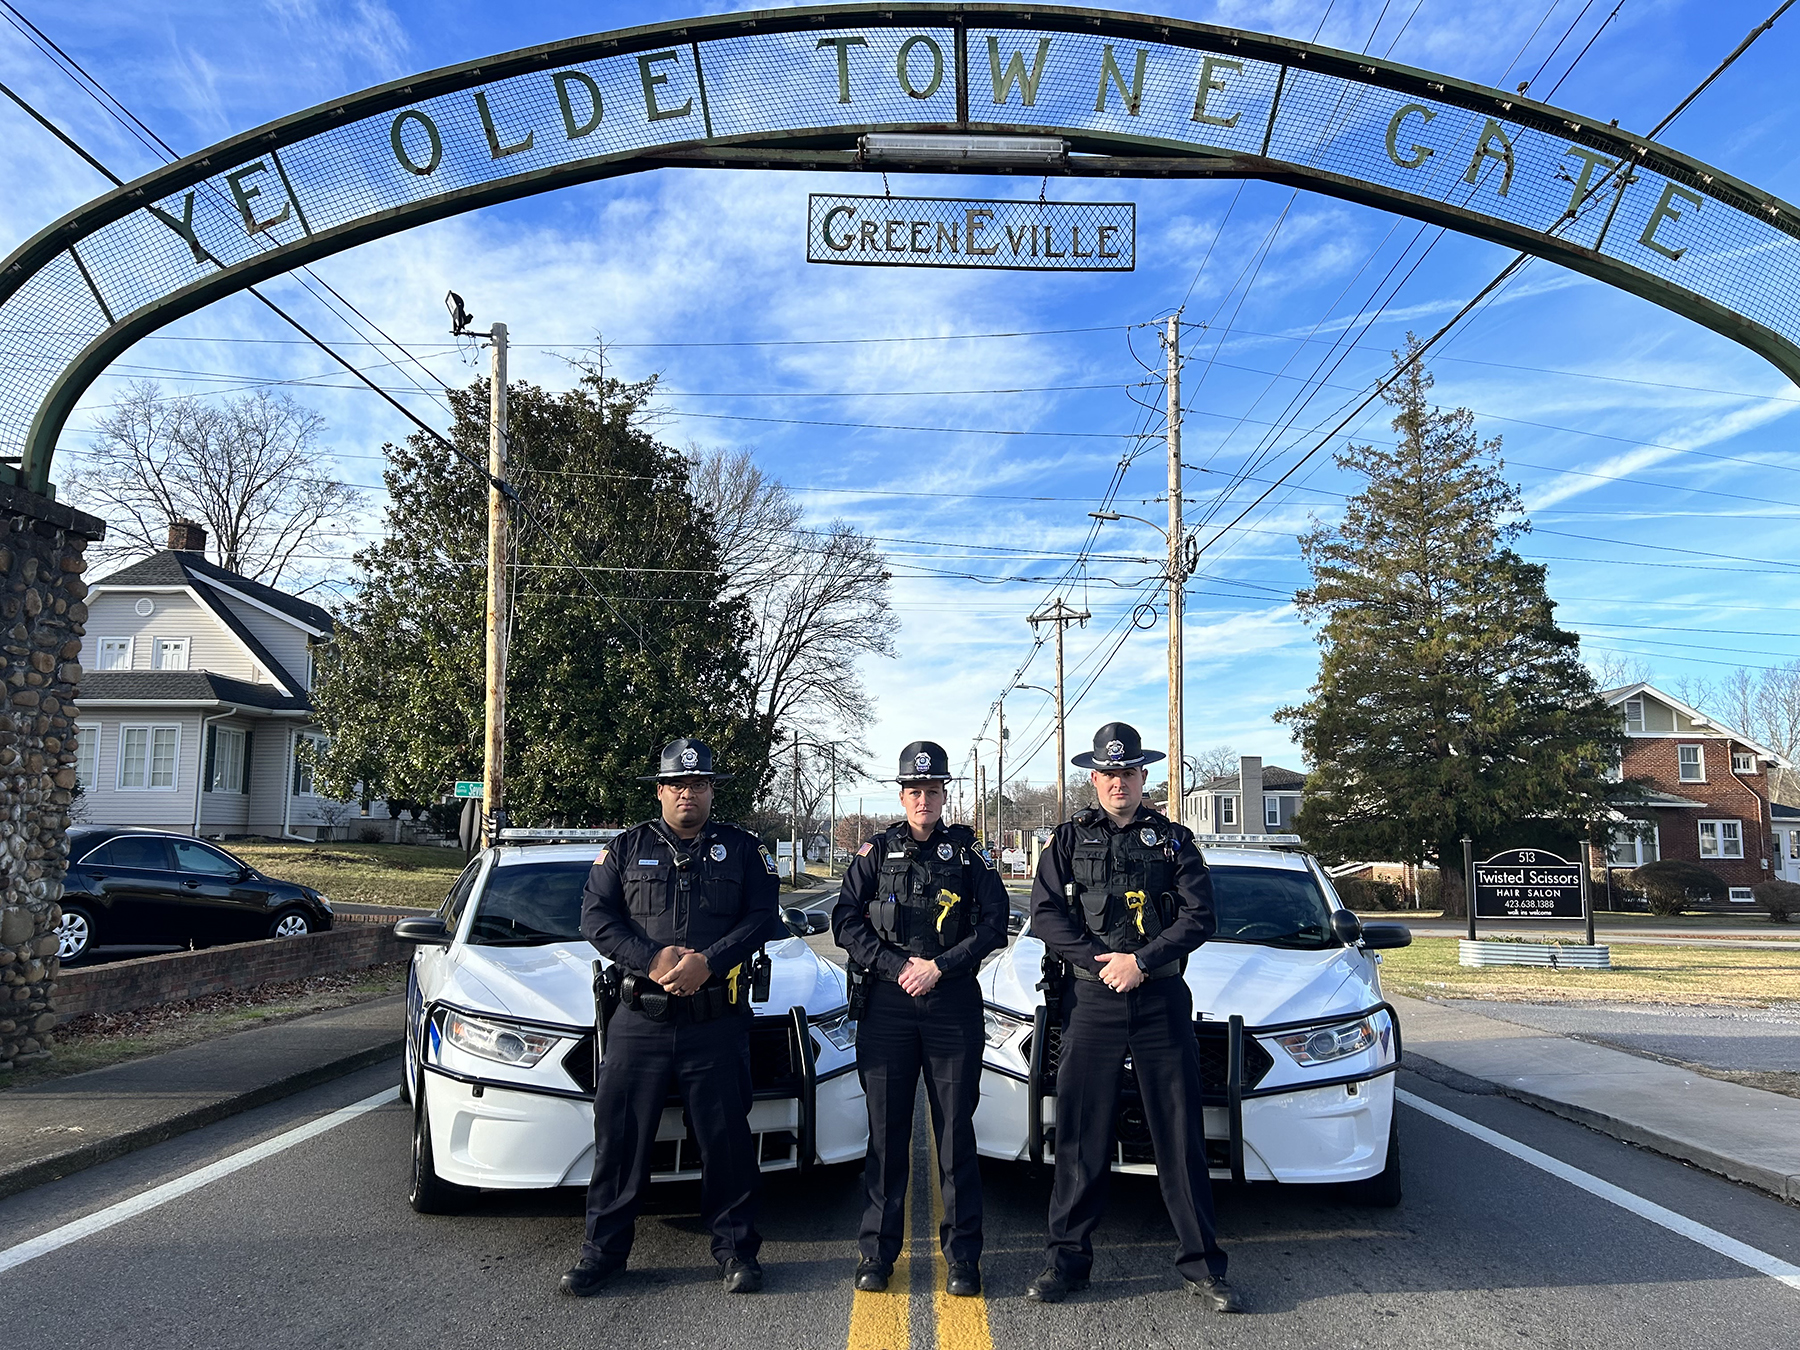 Ye Olde Town Gate and officers